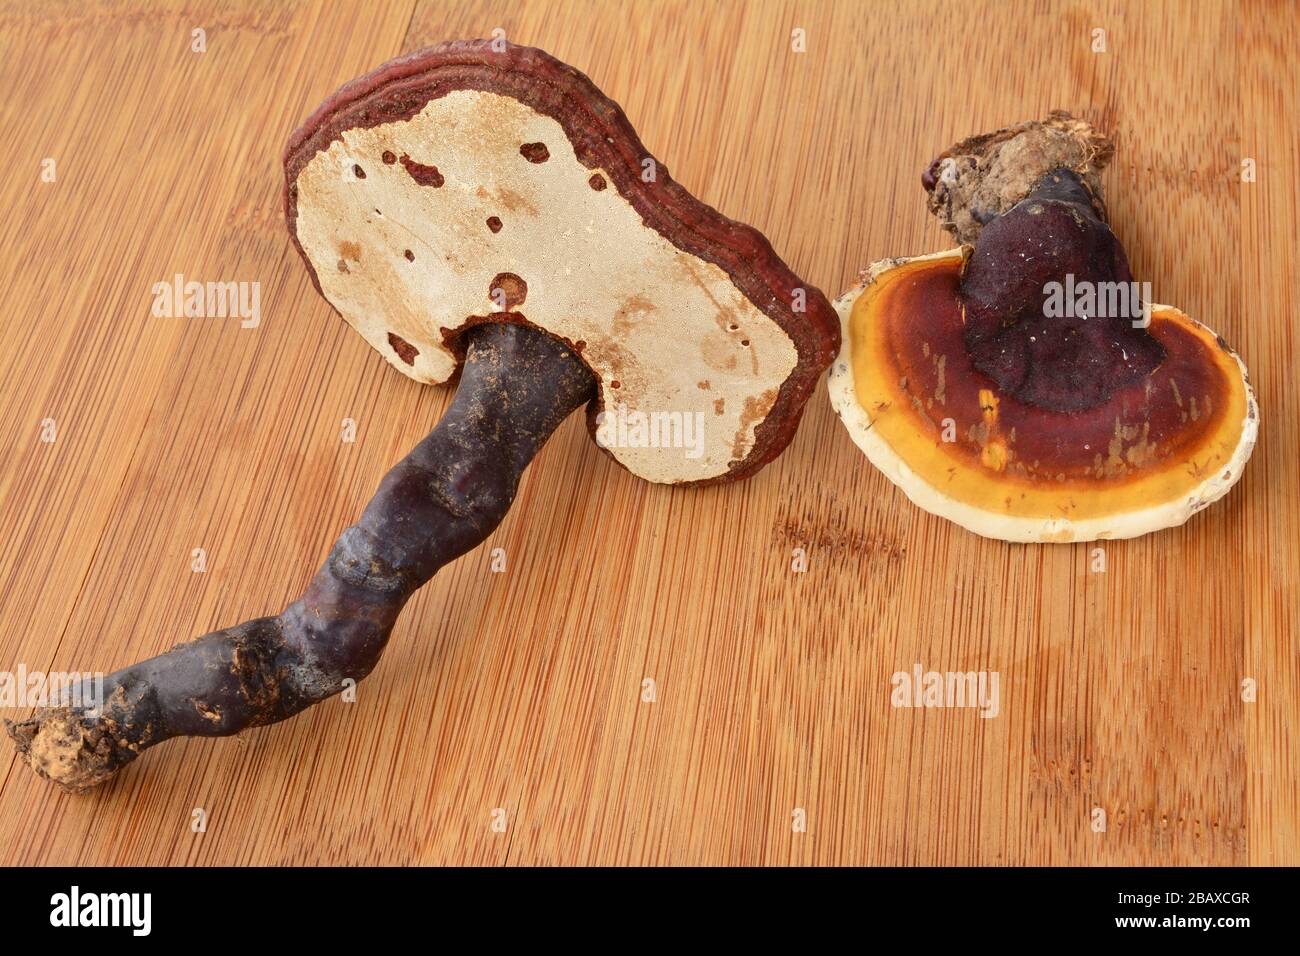 Two Danoderma lucidum or Reishi mushrooms on bamboo wooden table, ready for curative drink preparation Stock Photo